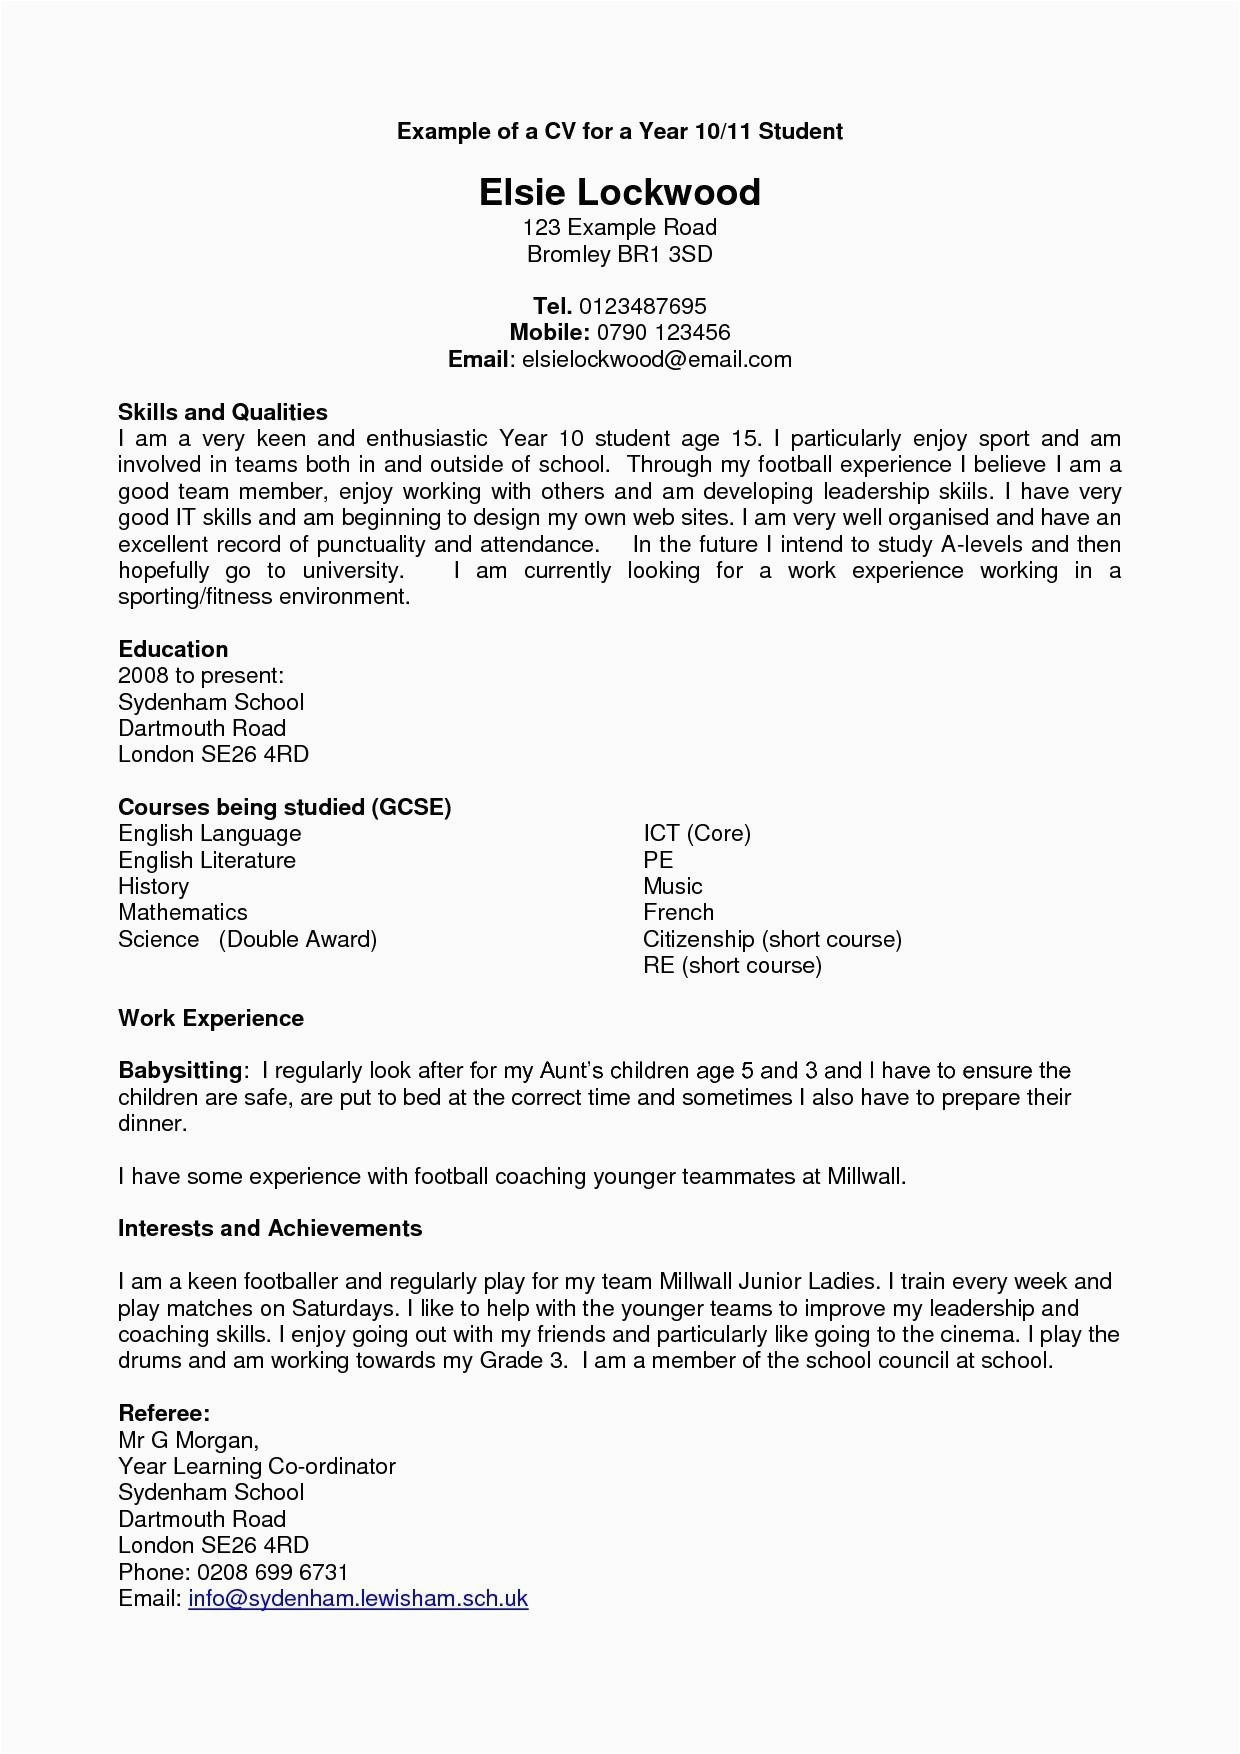 Sample Resume for Year 10 Work Experience Cv Template Year 10 Resume format